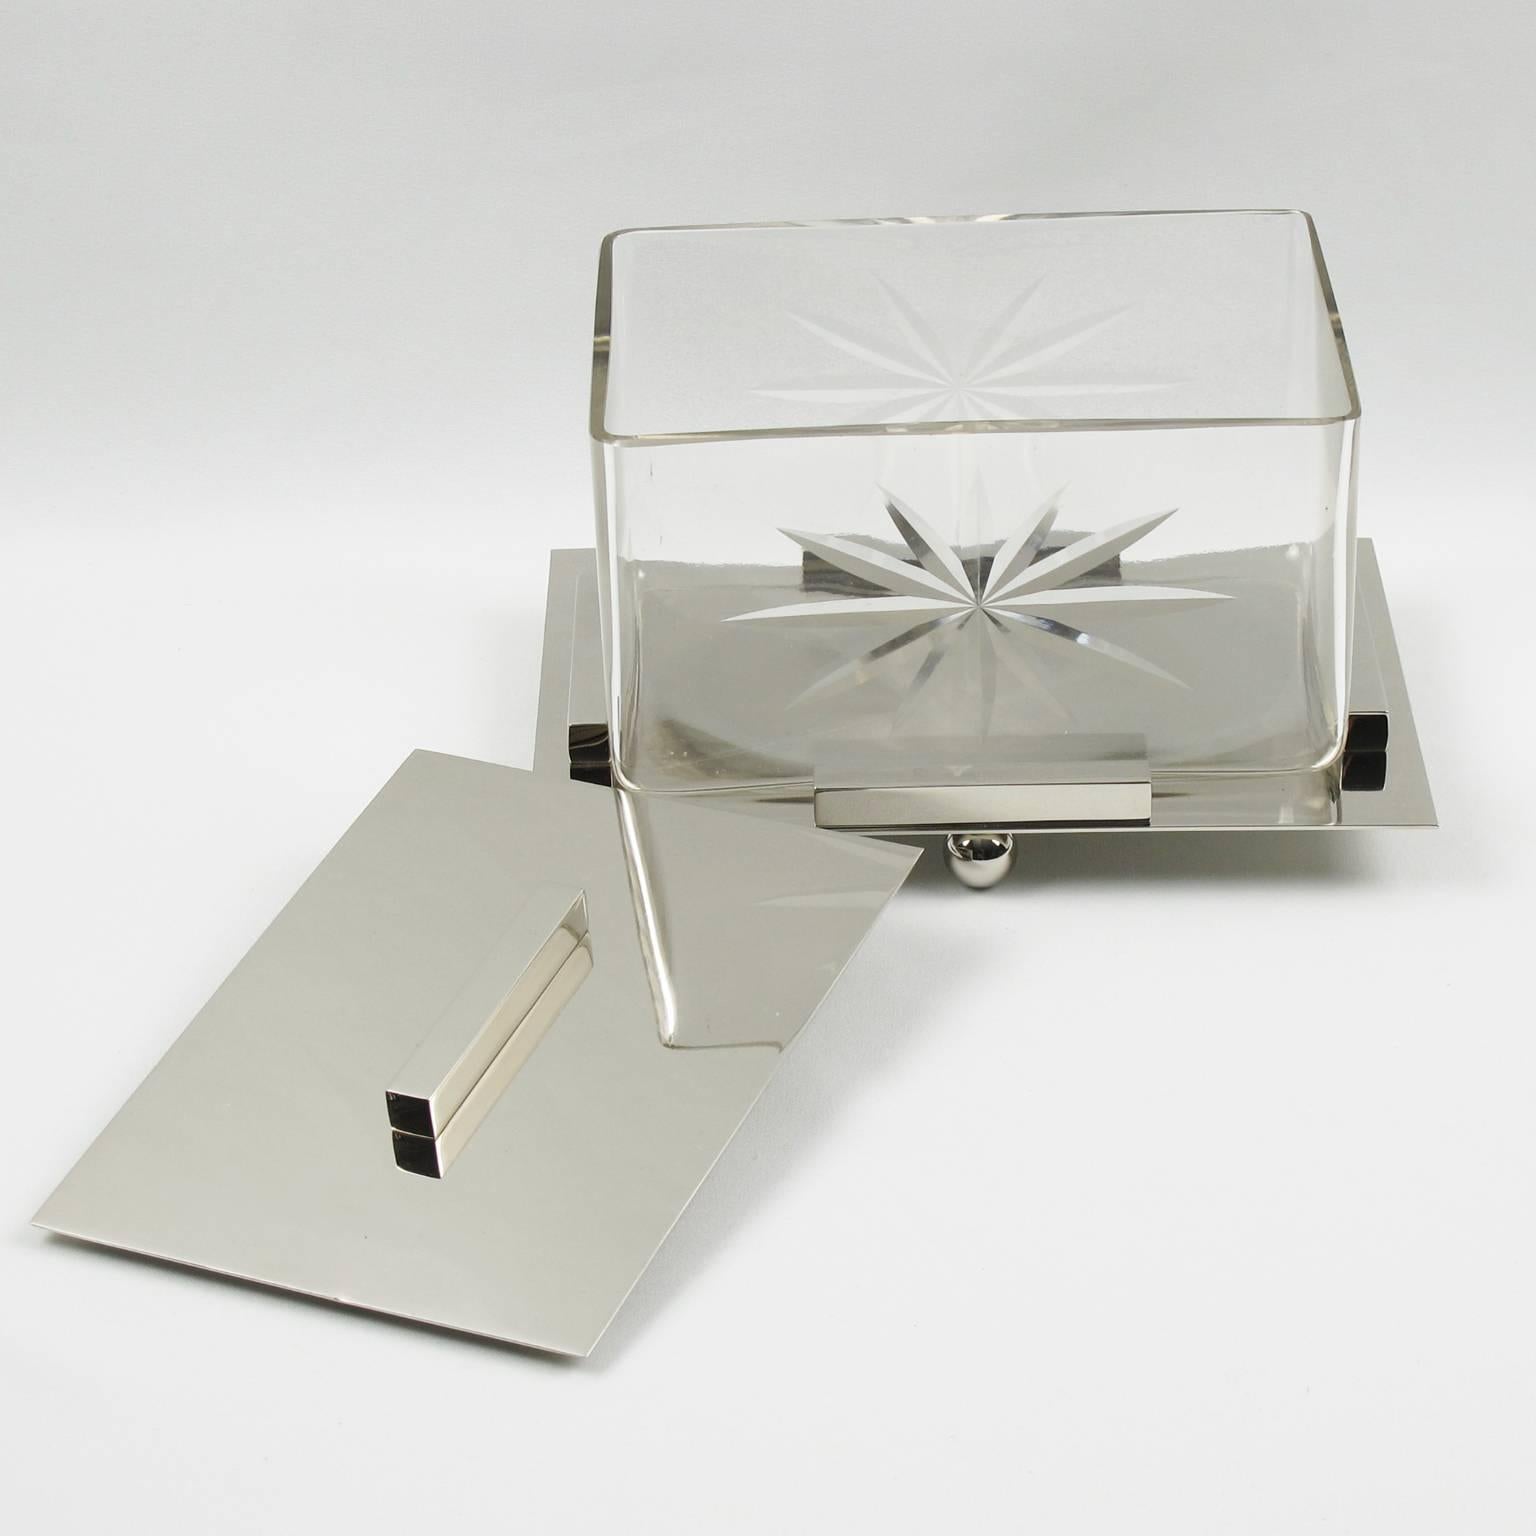 Mid-20th Century French Art Deco Chrome and Crystal Decorative Cookie Box, circa 1930s